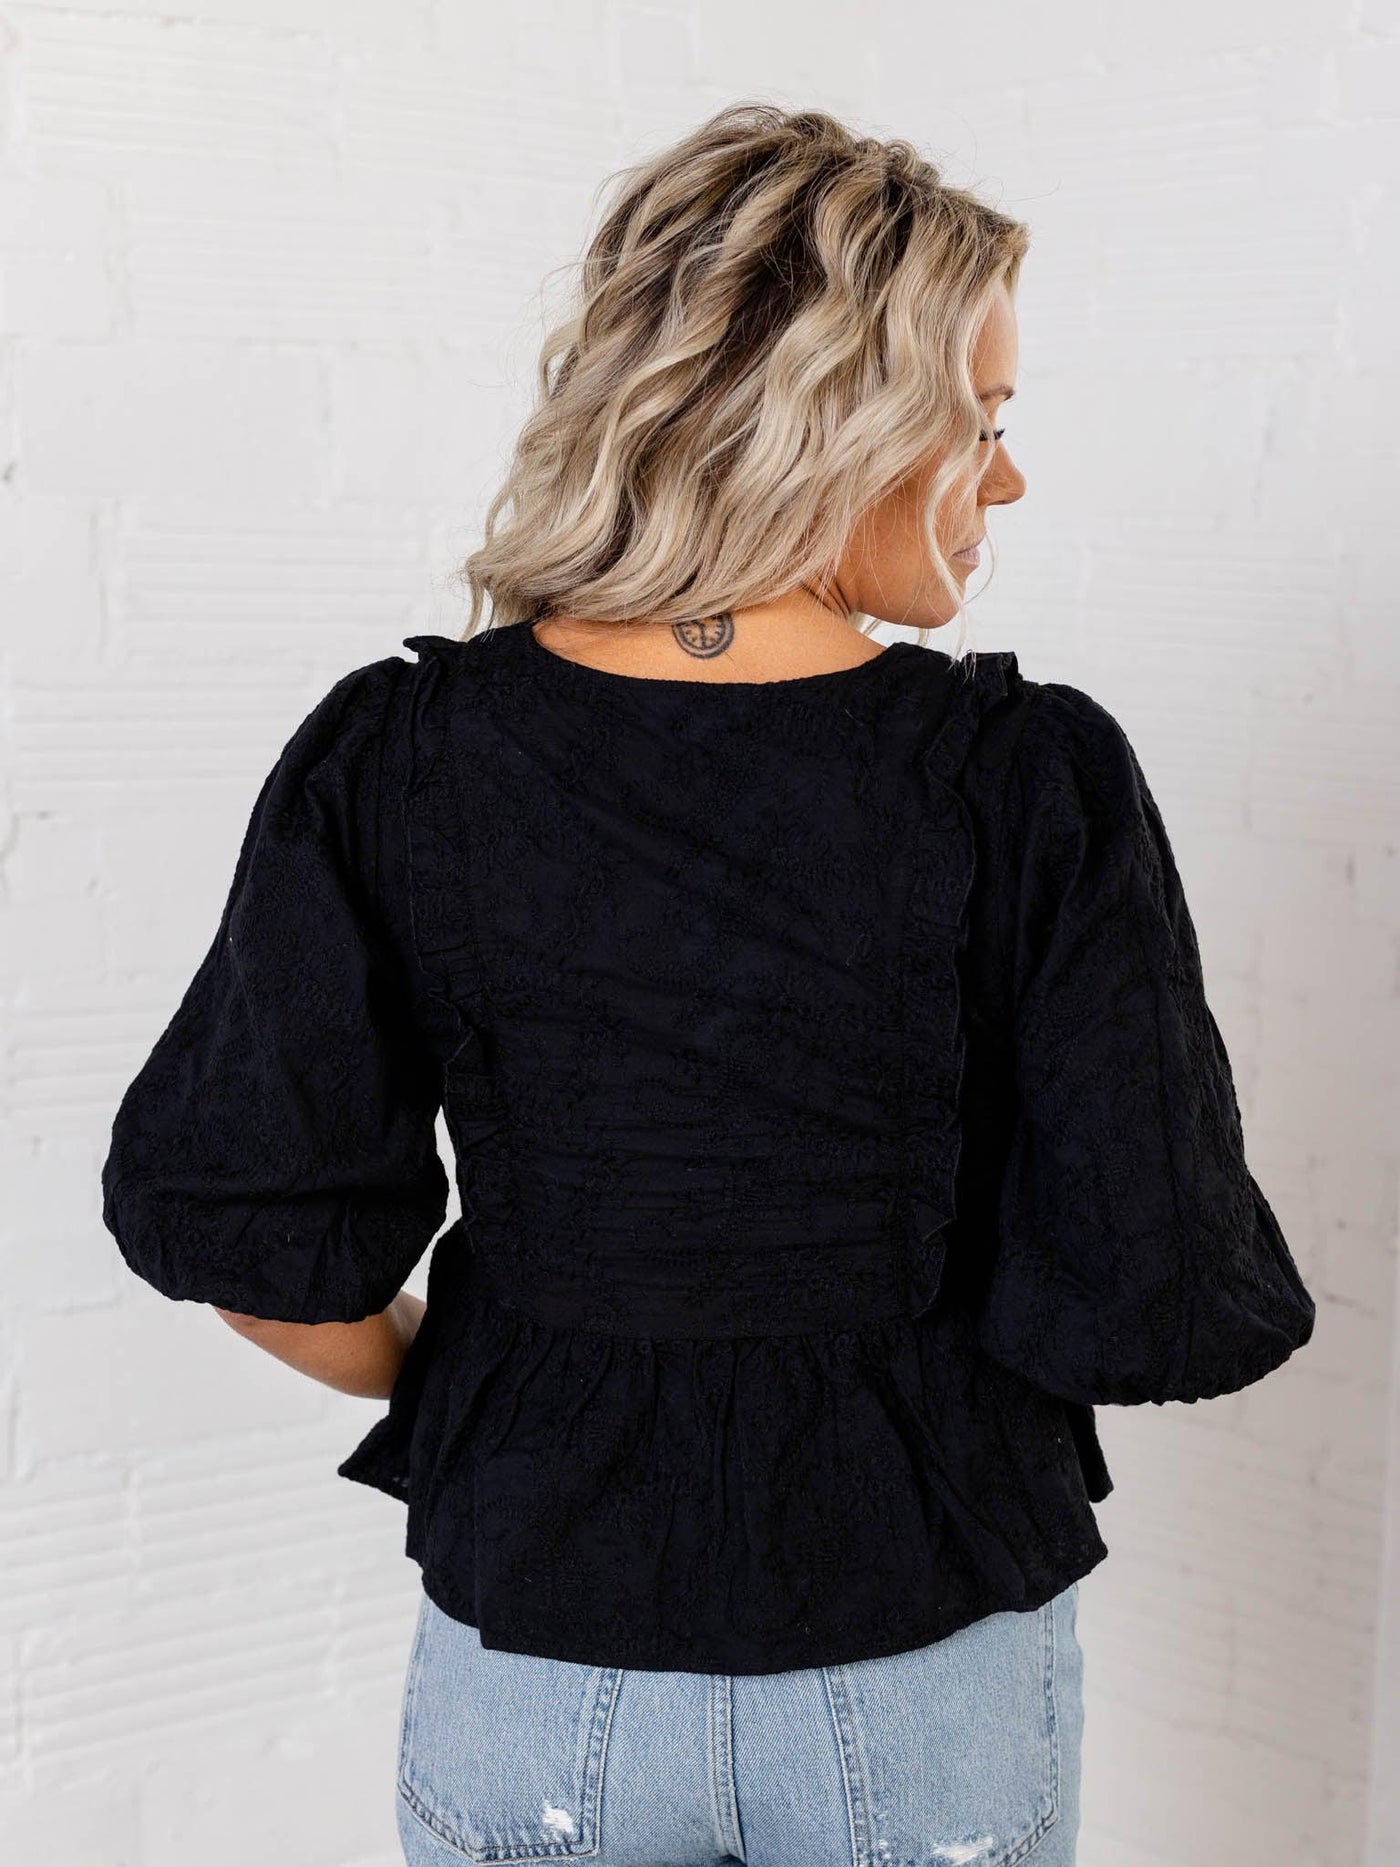 square neck button front cropped peplum